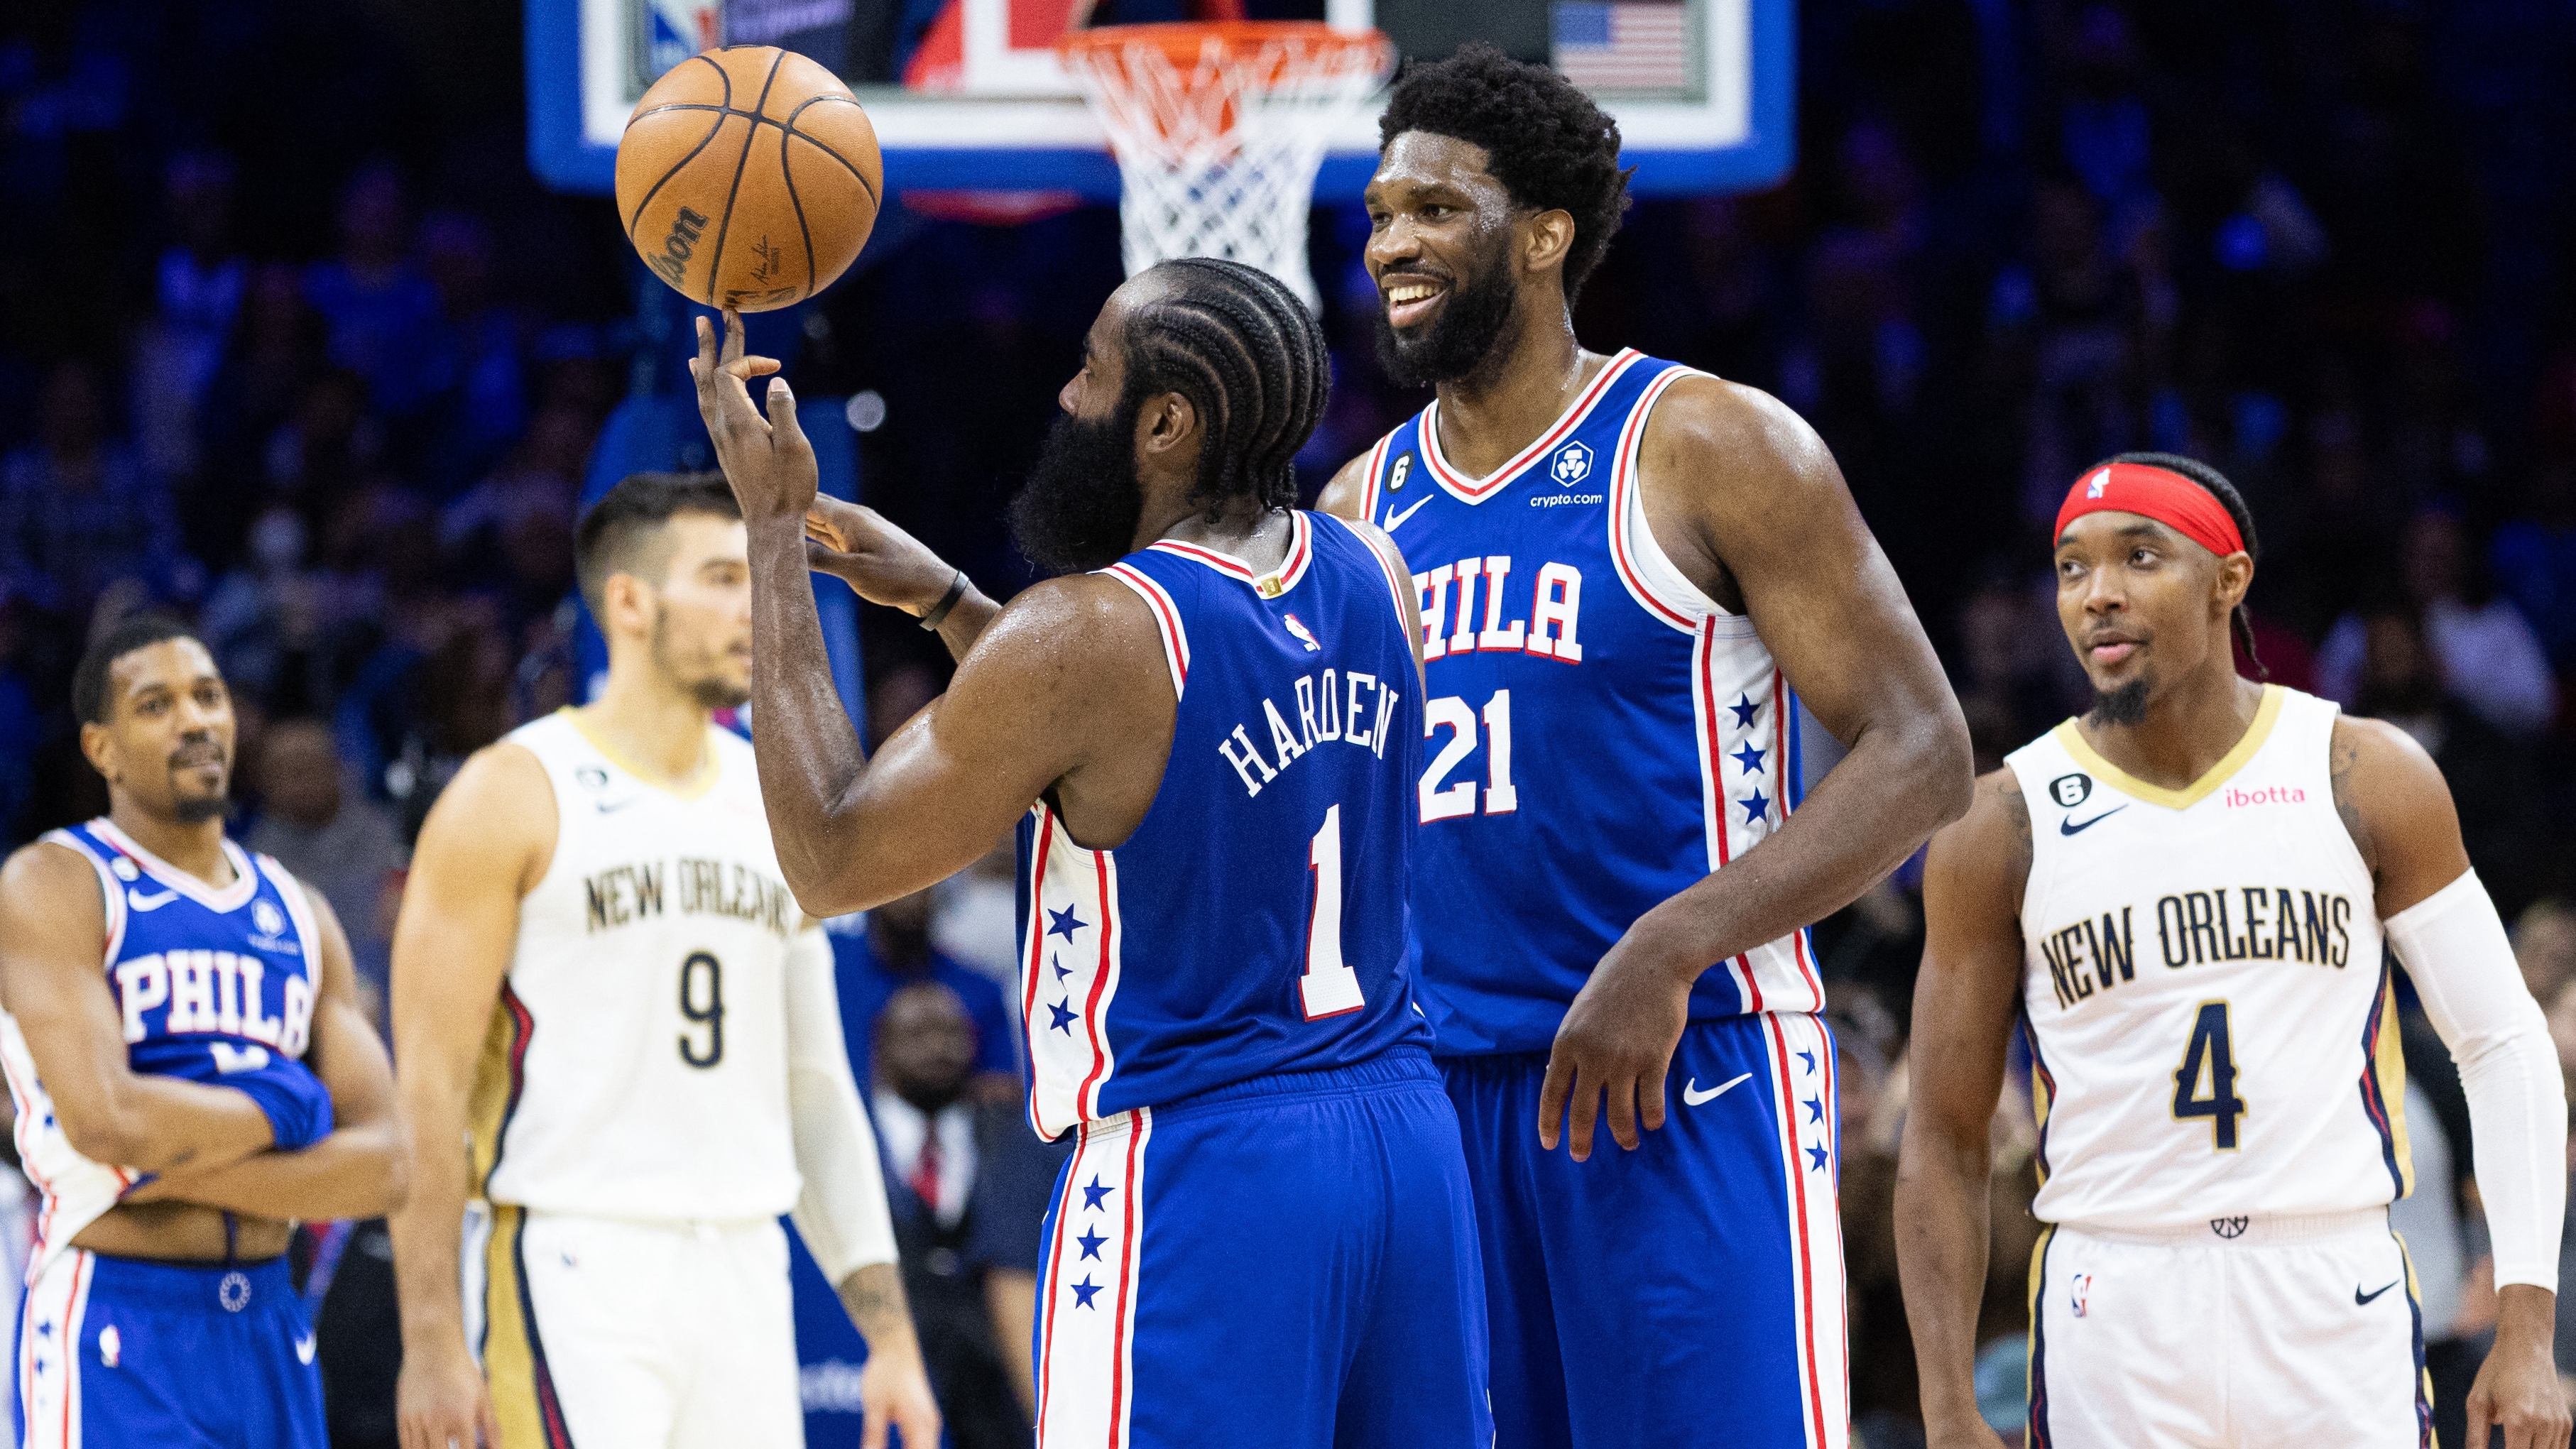 James Harden and a controversial action at the end of the game between the Philadelphia 76ers and New Orleans Pelicans in the NBA (Credit: Bill Streicher-USA TODAY Sports)